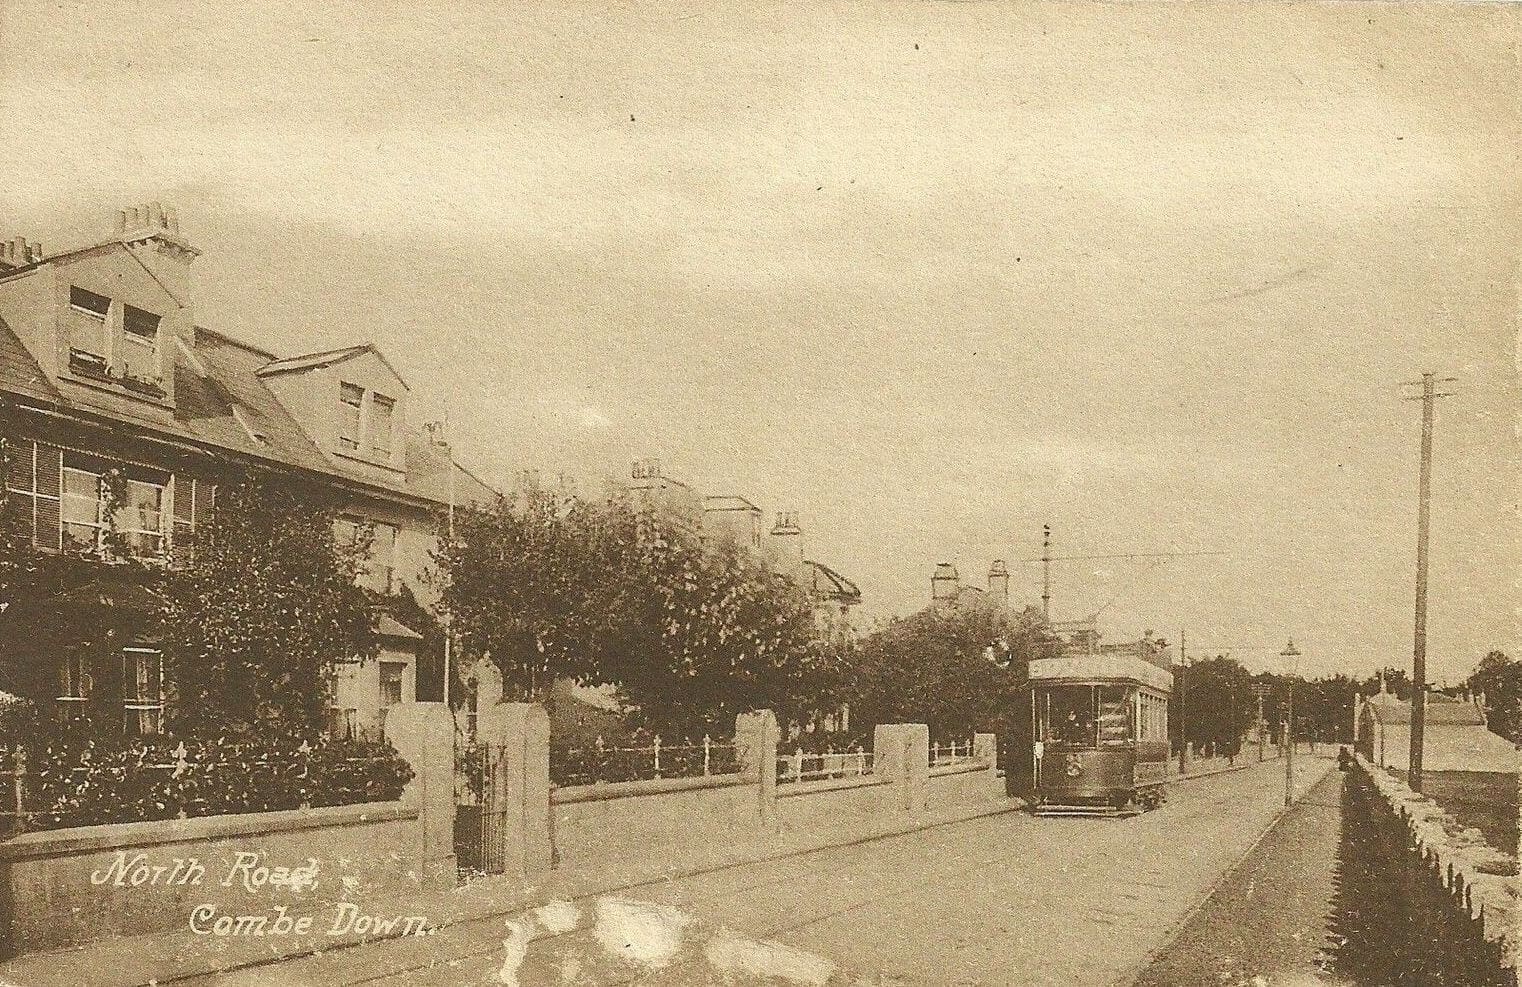 North Road, Combe Down about 1930s